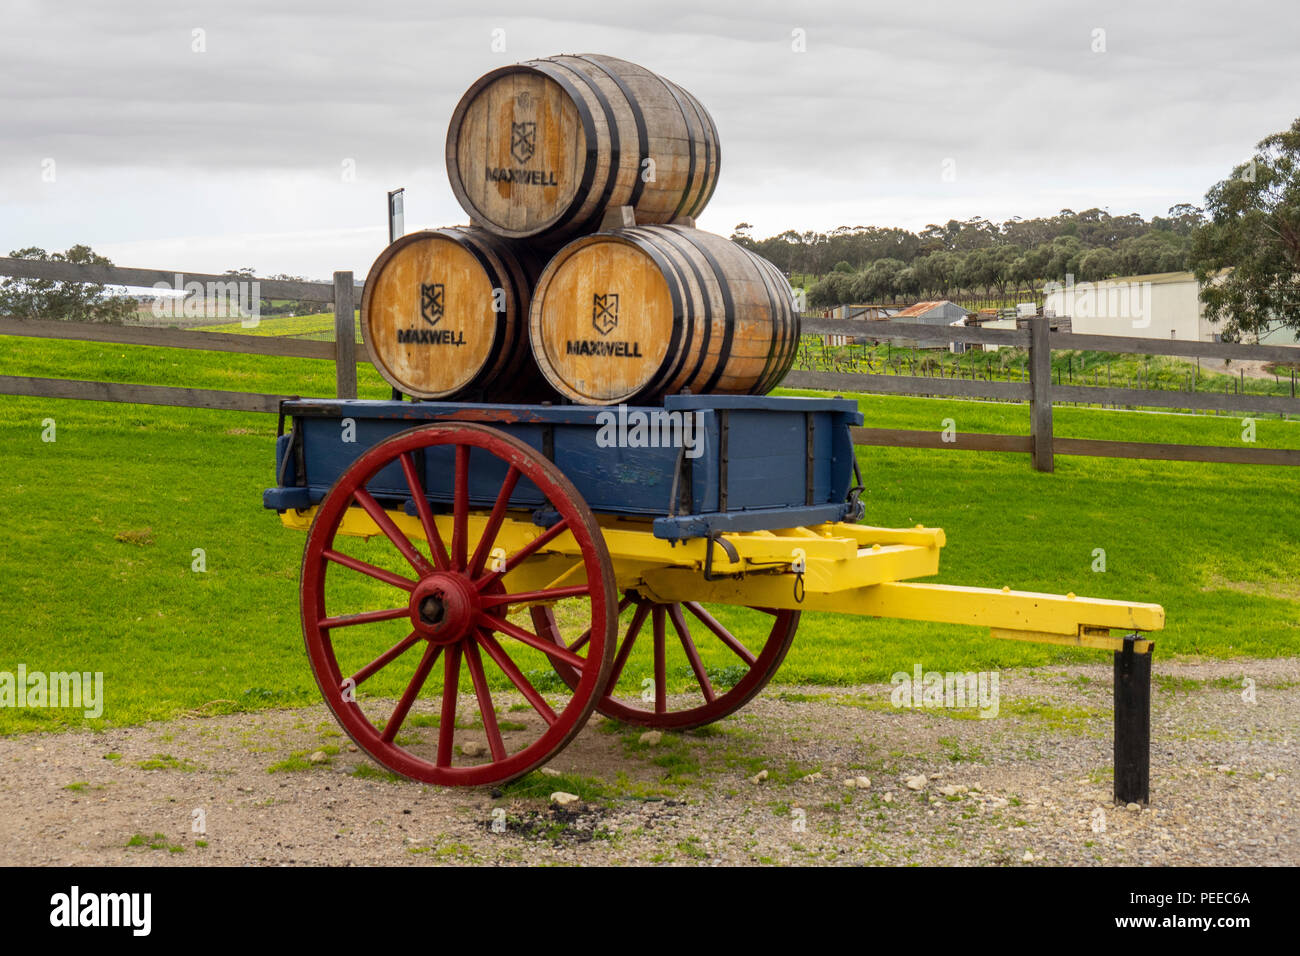 Three wooden barrels on a wooden cart at the entrance to Maxwell Winery McLaren Vale SA Australia. Stock Photo